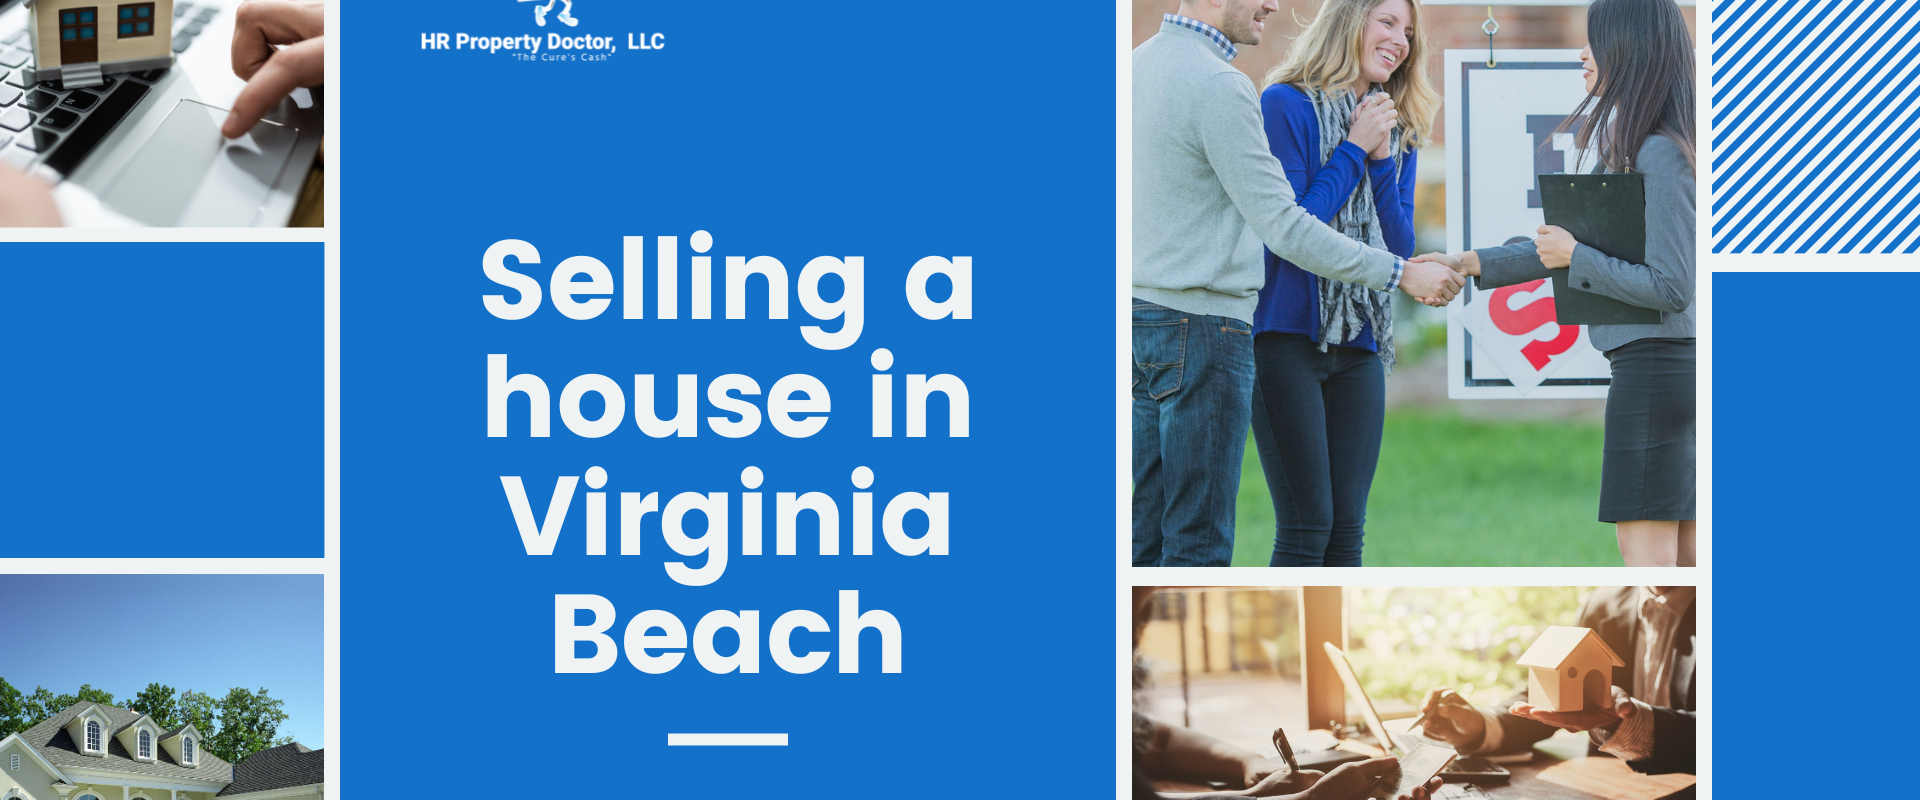 Selling a house in virginia beach